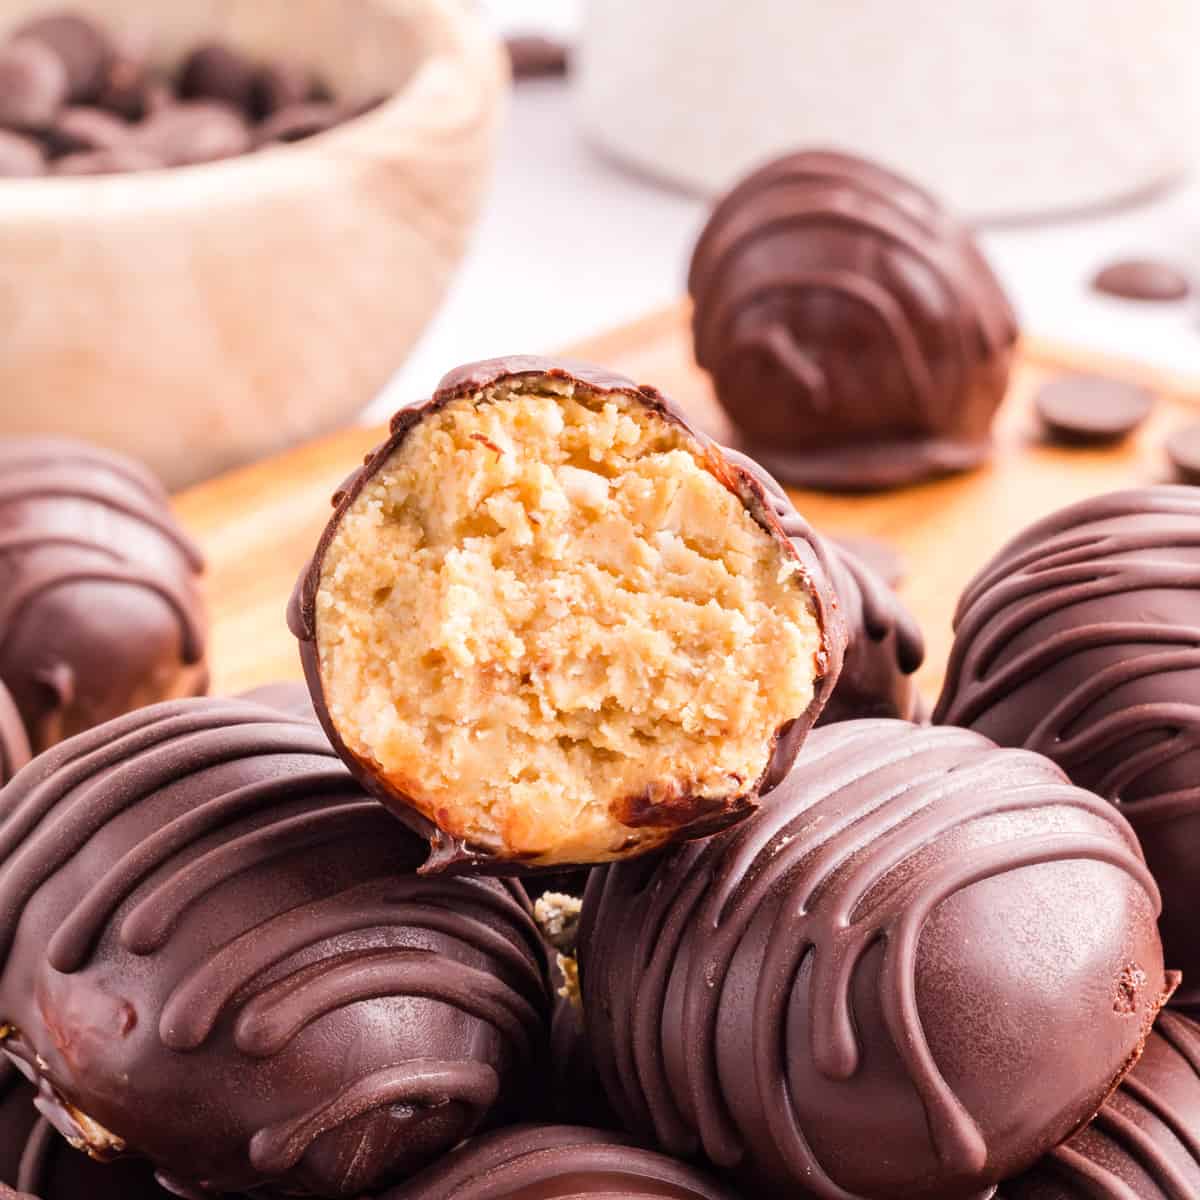 A pile of chocolate and peanut butter truffles.